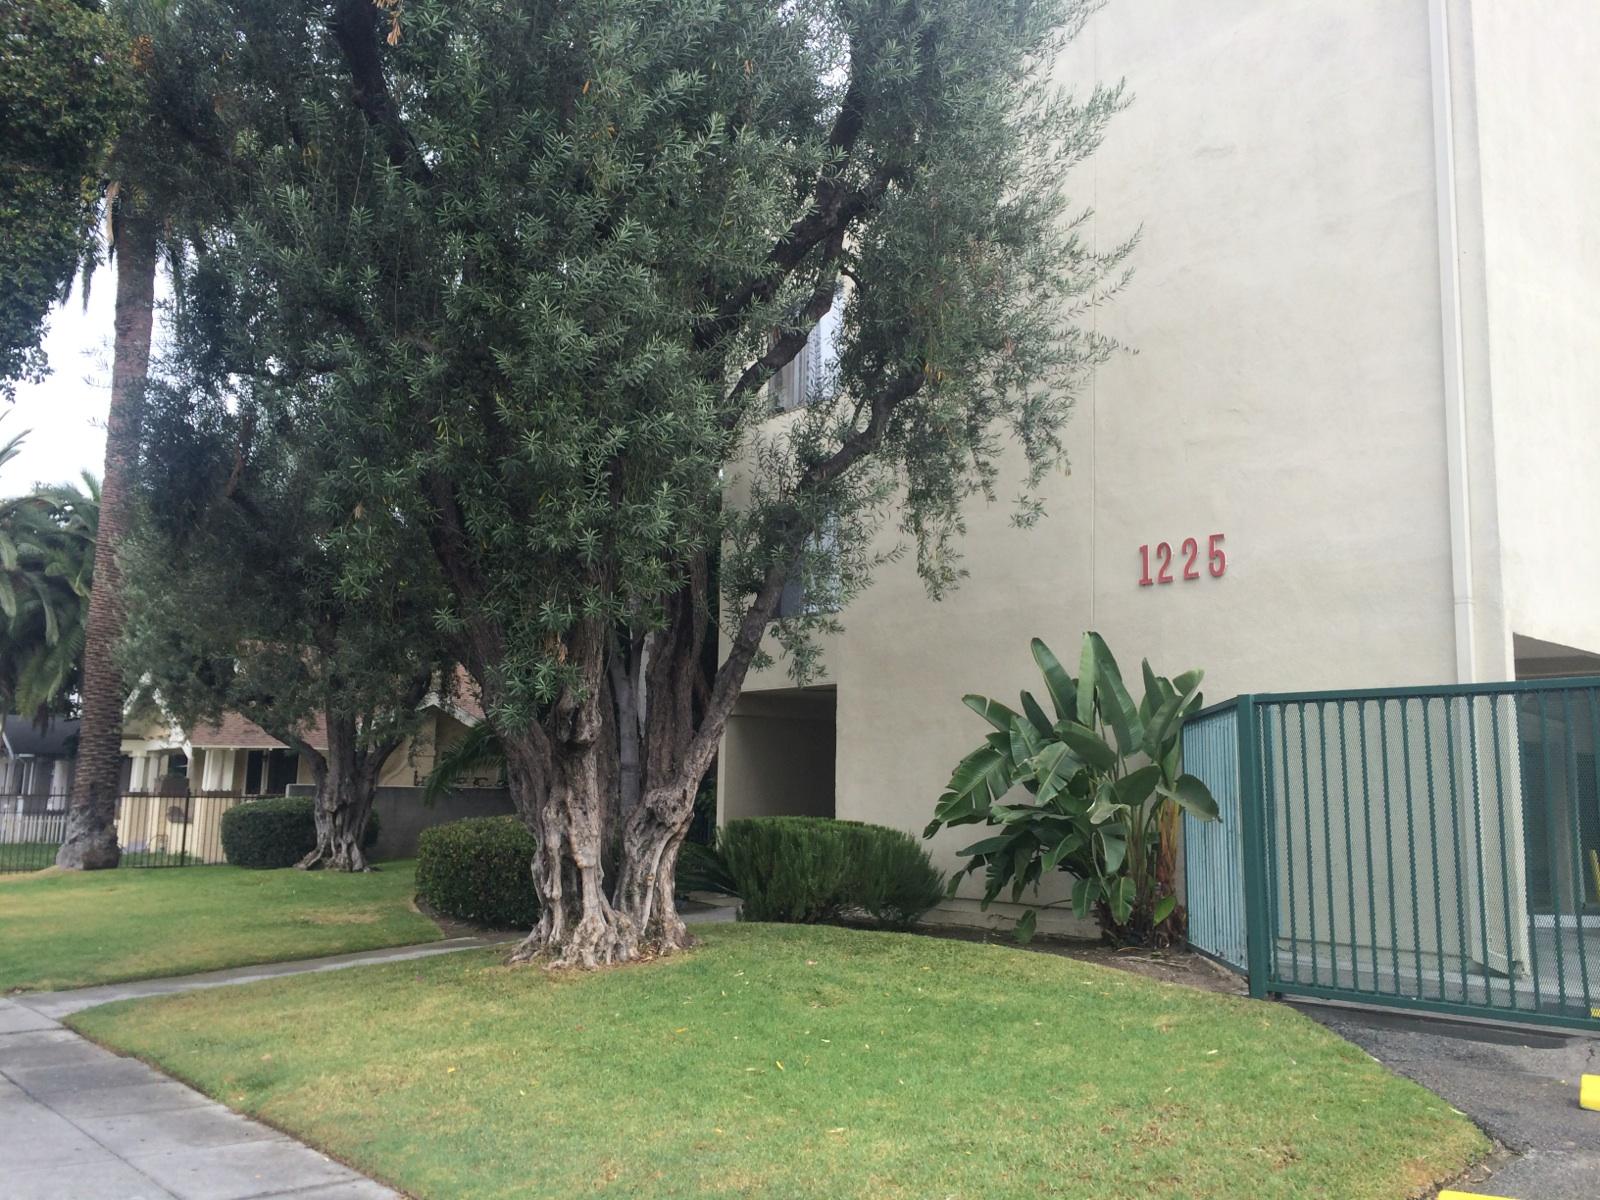 Street view of Ingram Preservation Properties showing Large full tree on the grass area in front of the building